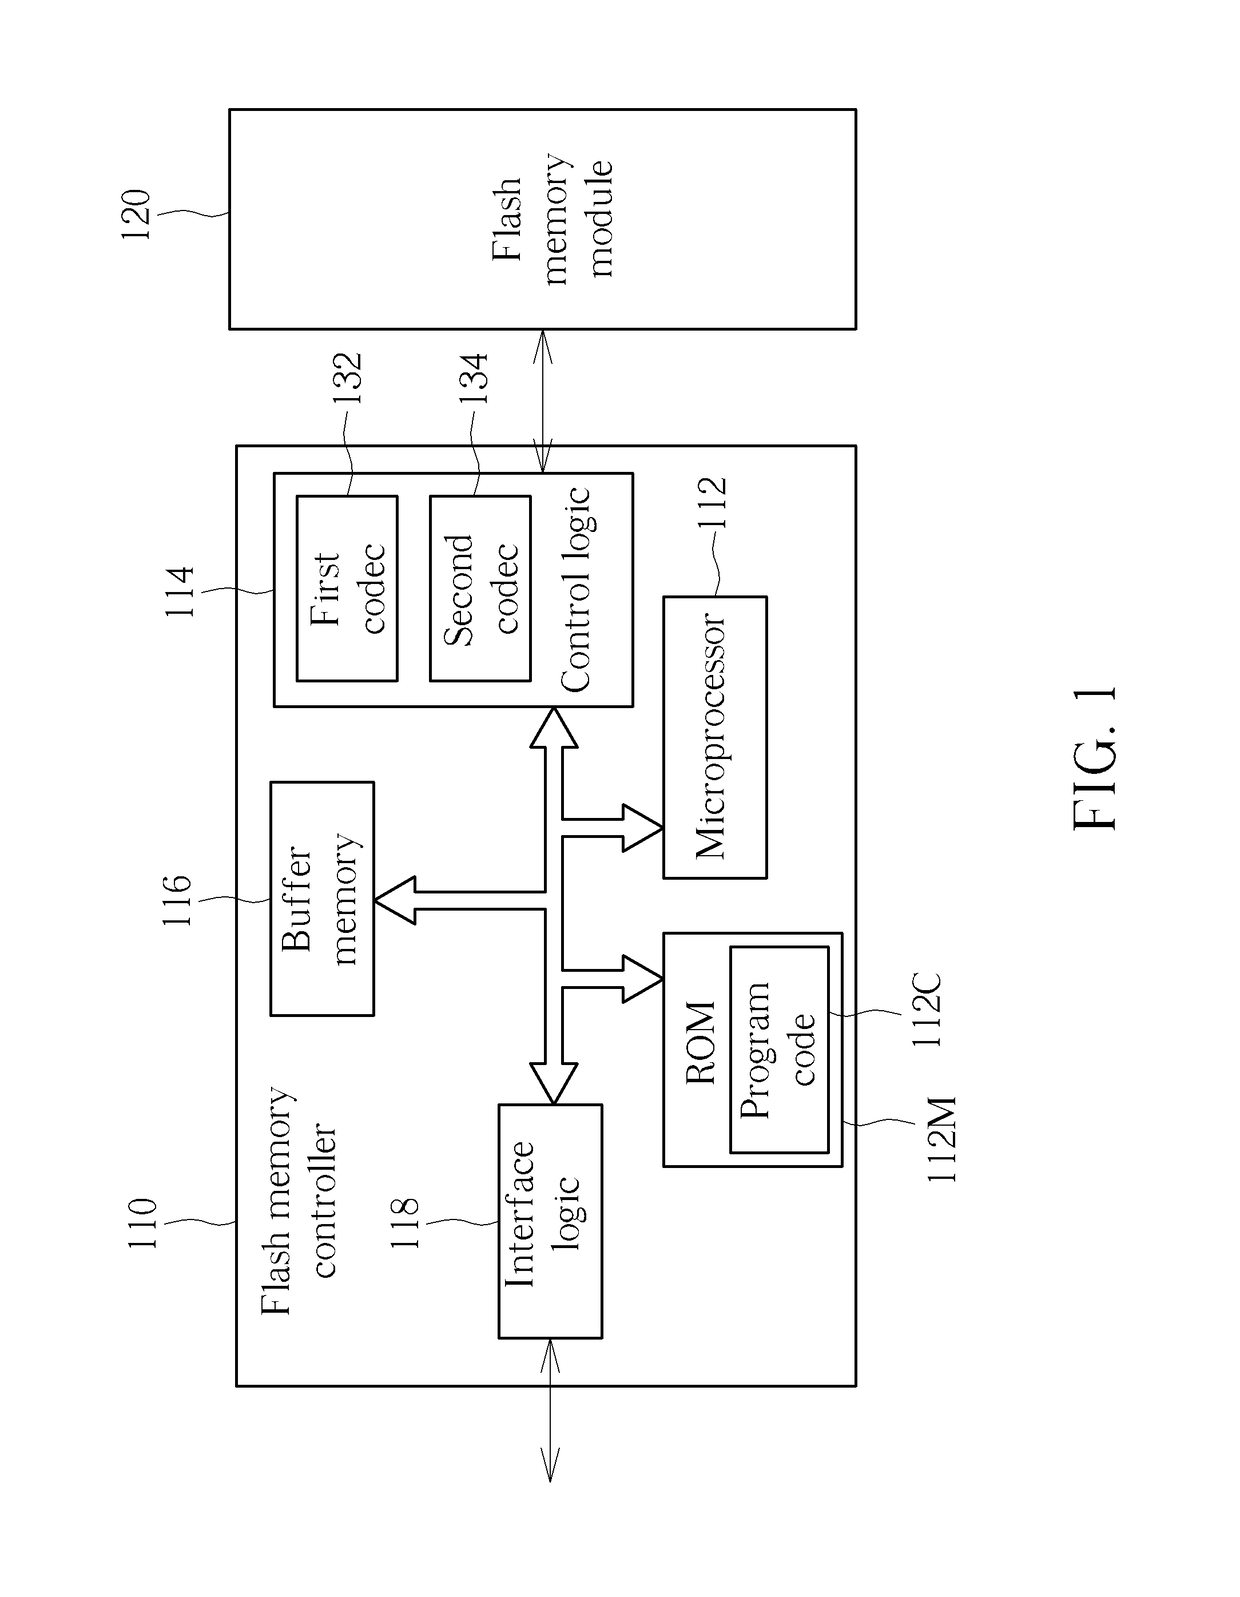 Flash memory controller and memory device for accessing flash memory module, and associated method